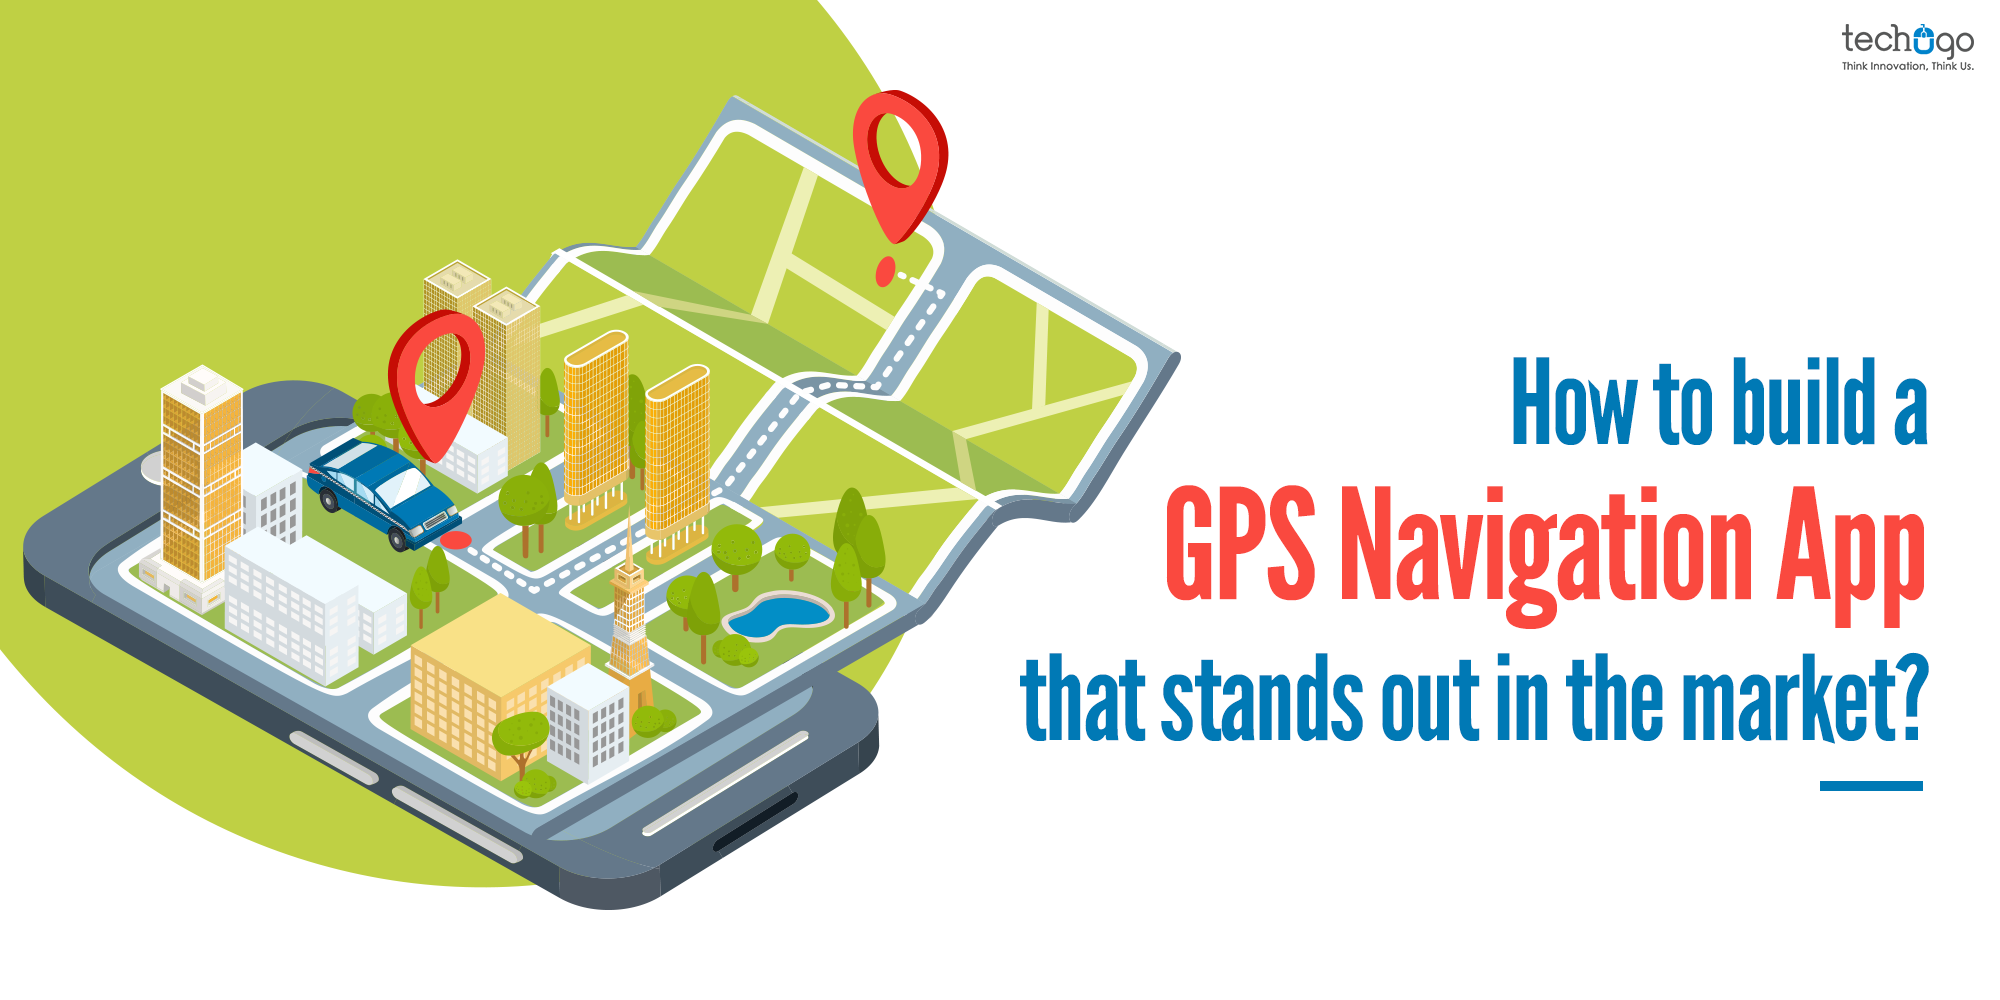 How To Build A Gps Navigation App That Stands Out In The Market?